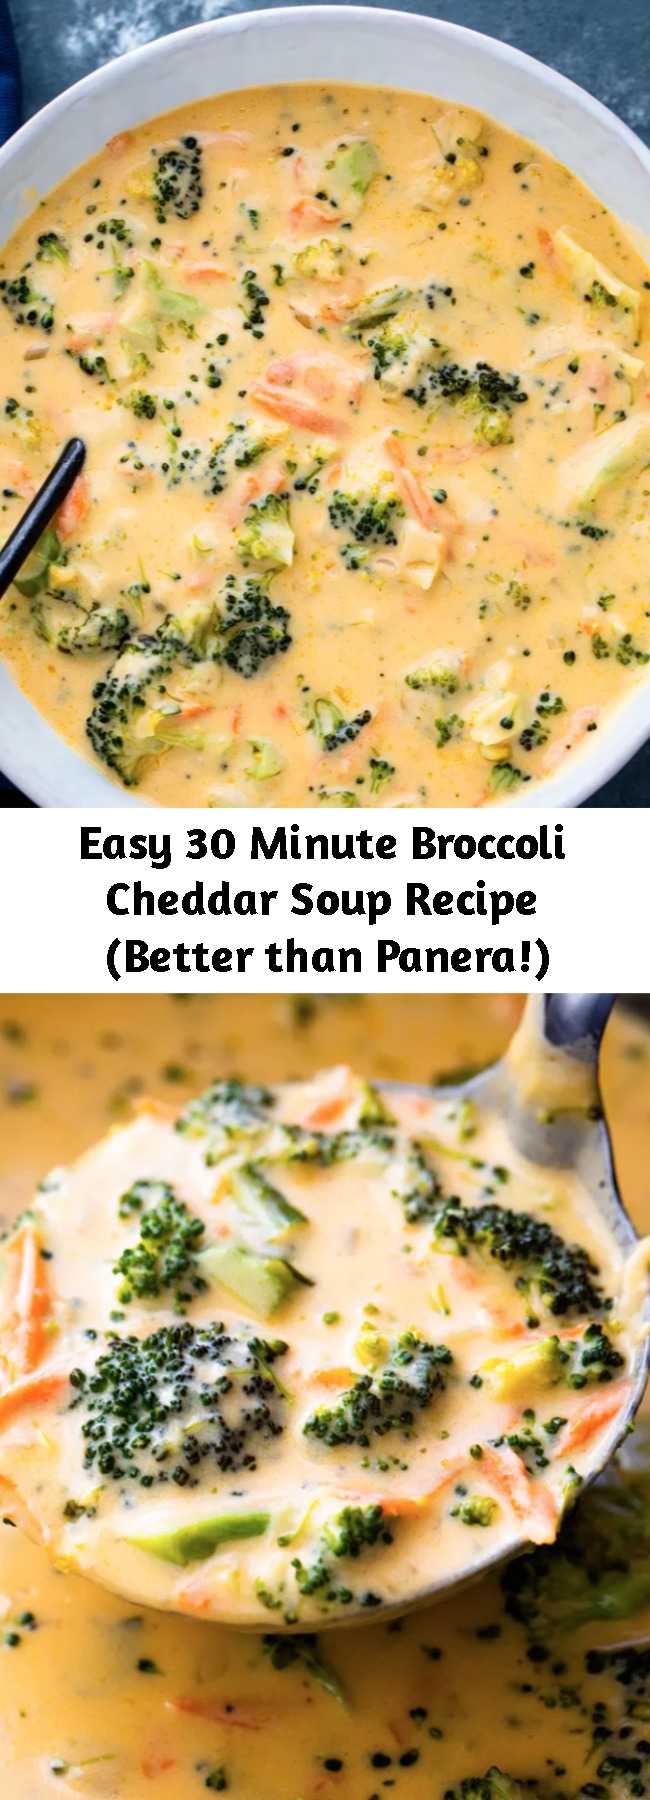 Easy 30 Minute Broccoli Cheddar Soup Recipe (Better than Panera!) - Healthy broccoli cheddar soup packed with carrots, broccoli, garlic, and cheese. This creamy velvety soup is much better than Panera's broccoli cheddar soup and can be made in under 30 minutes for a fraction of the price! 